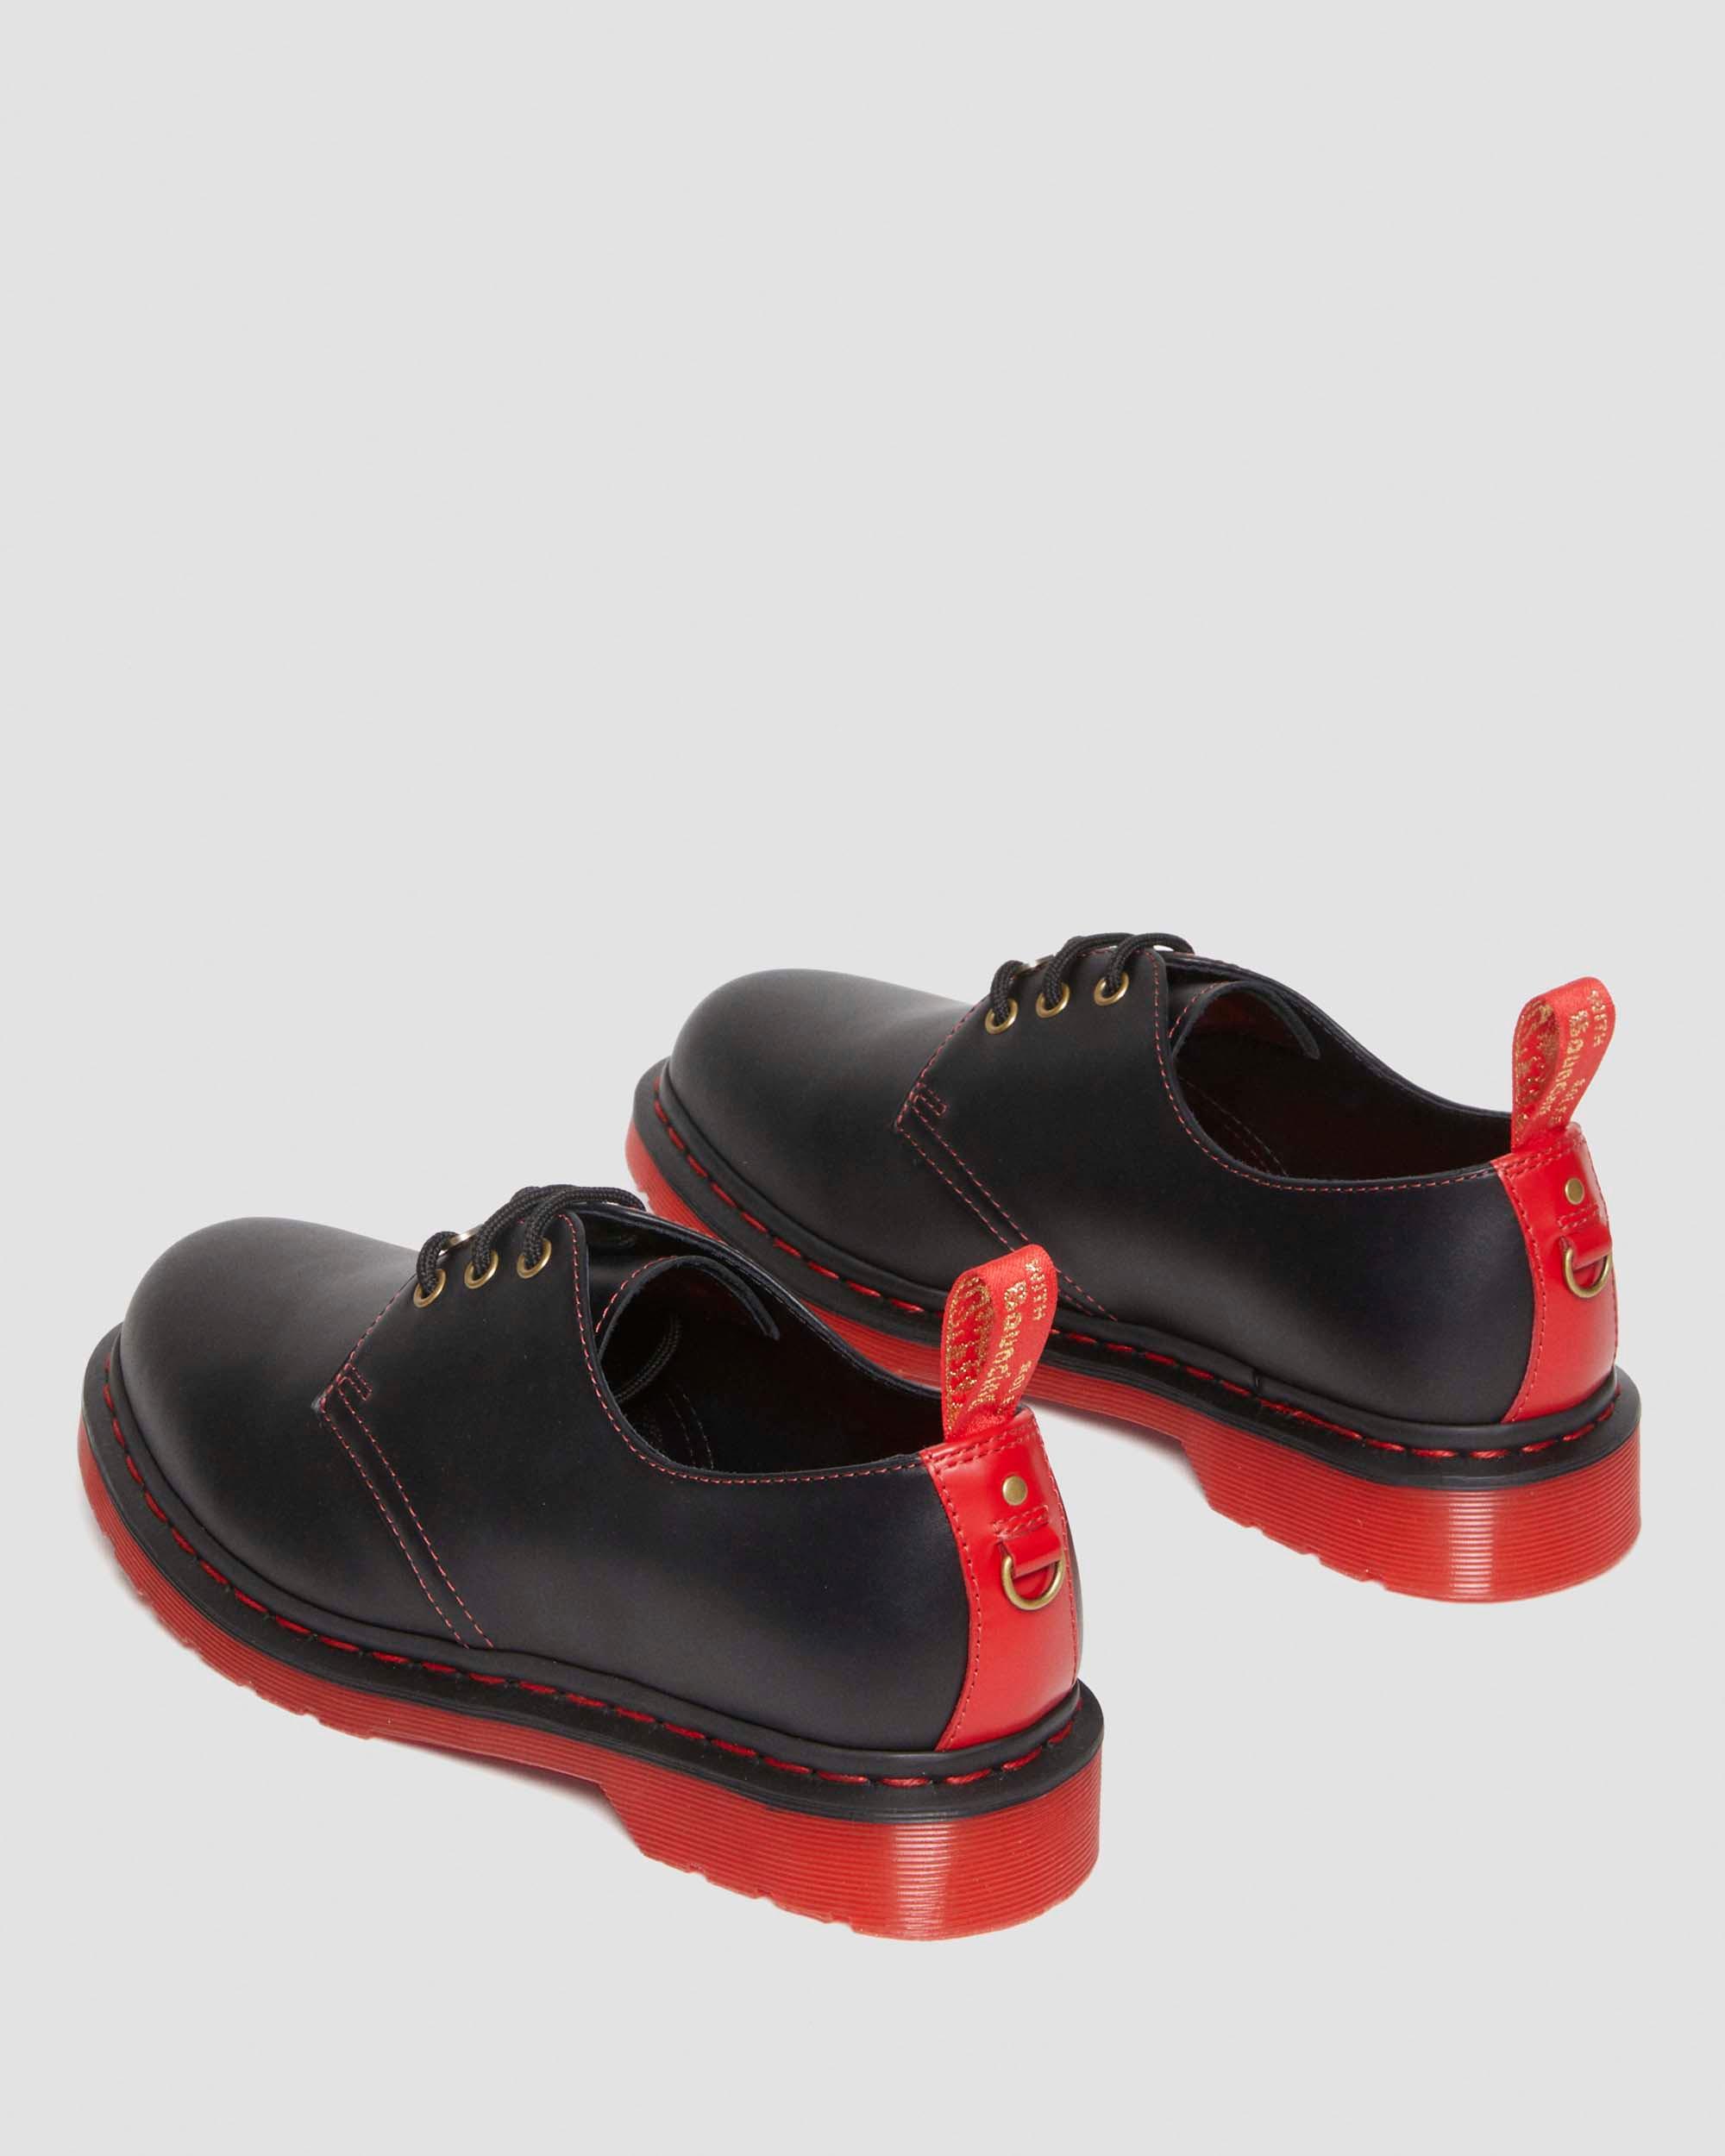 DR MARTENS 1461 Year of the Rabbit Smooth Leather Oxford Shoes